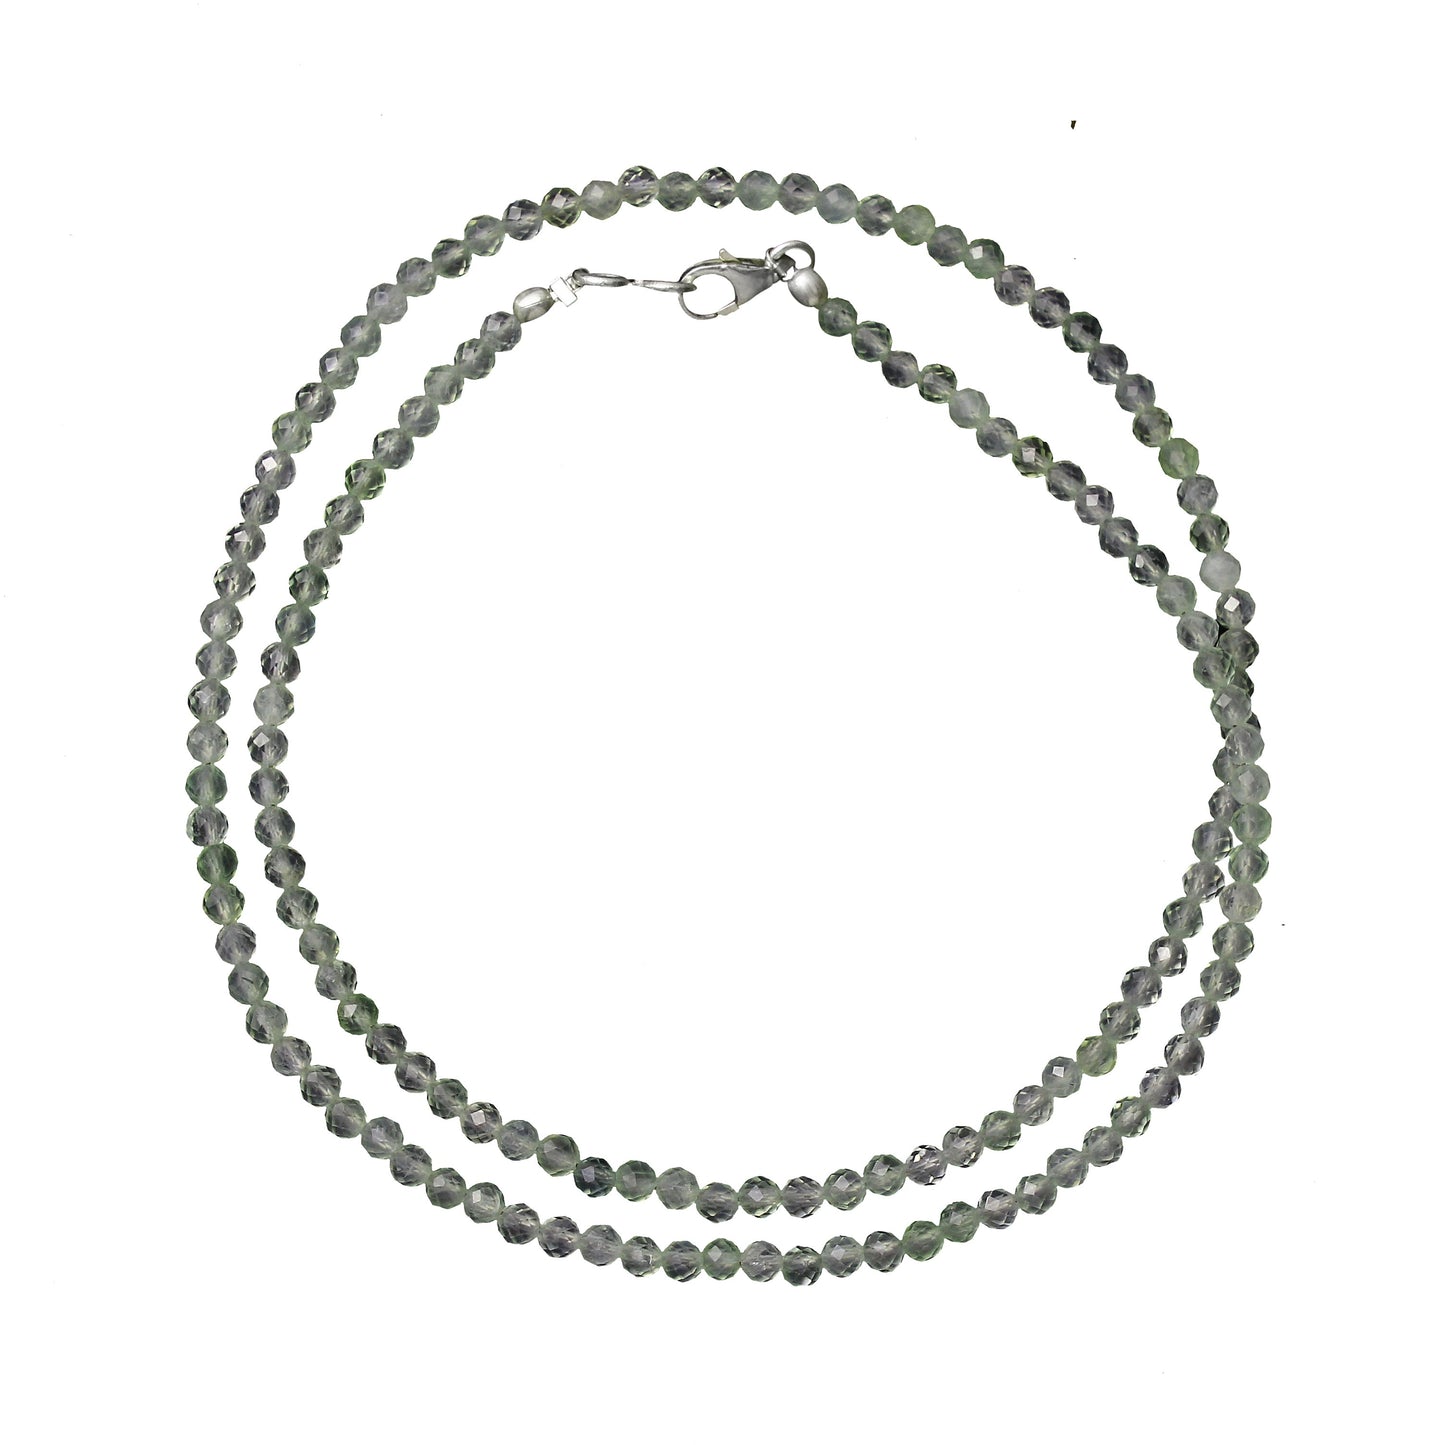 Natural Prasiolite Amethyst Beaded Necklace , Green Amethyst Faceted Round Gemstone Beads Necklace, GemsRush